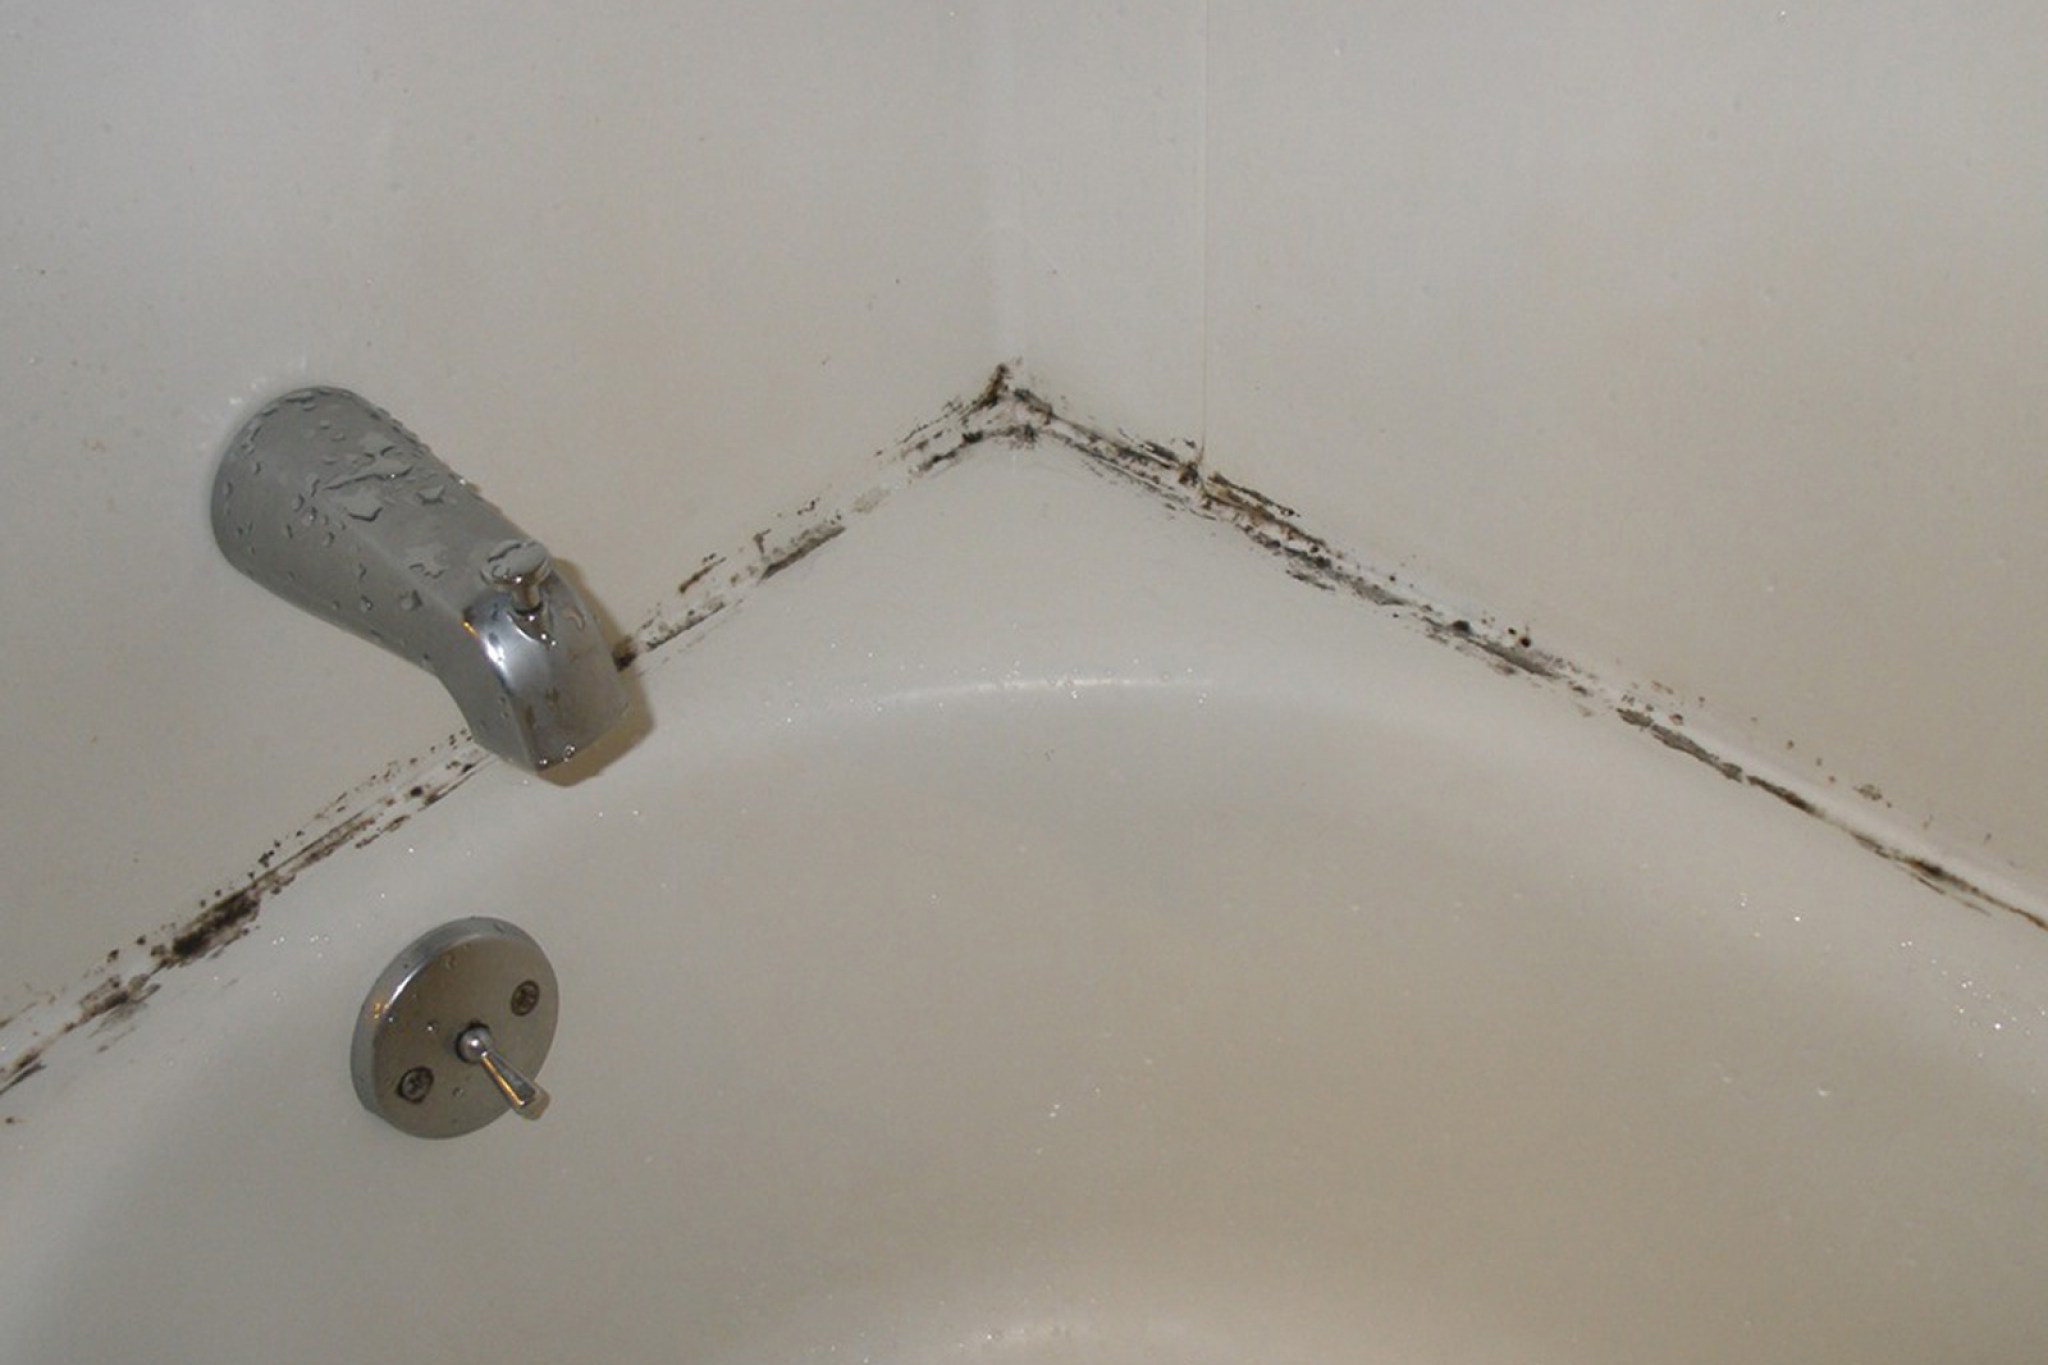 How to Remove Black Mold From Your Shower - Clean Shower Tips